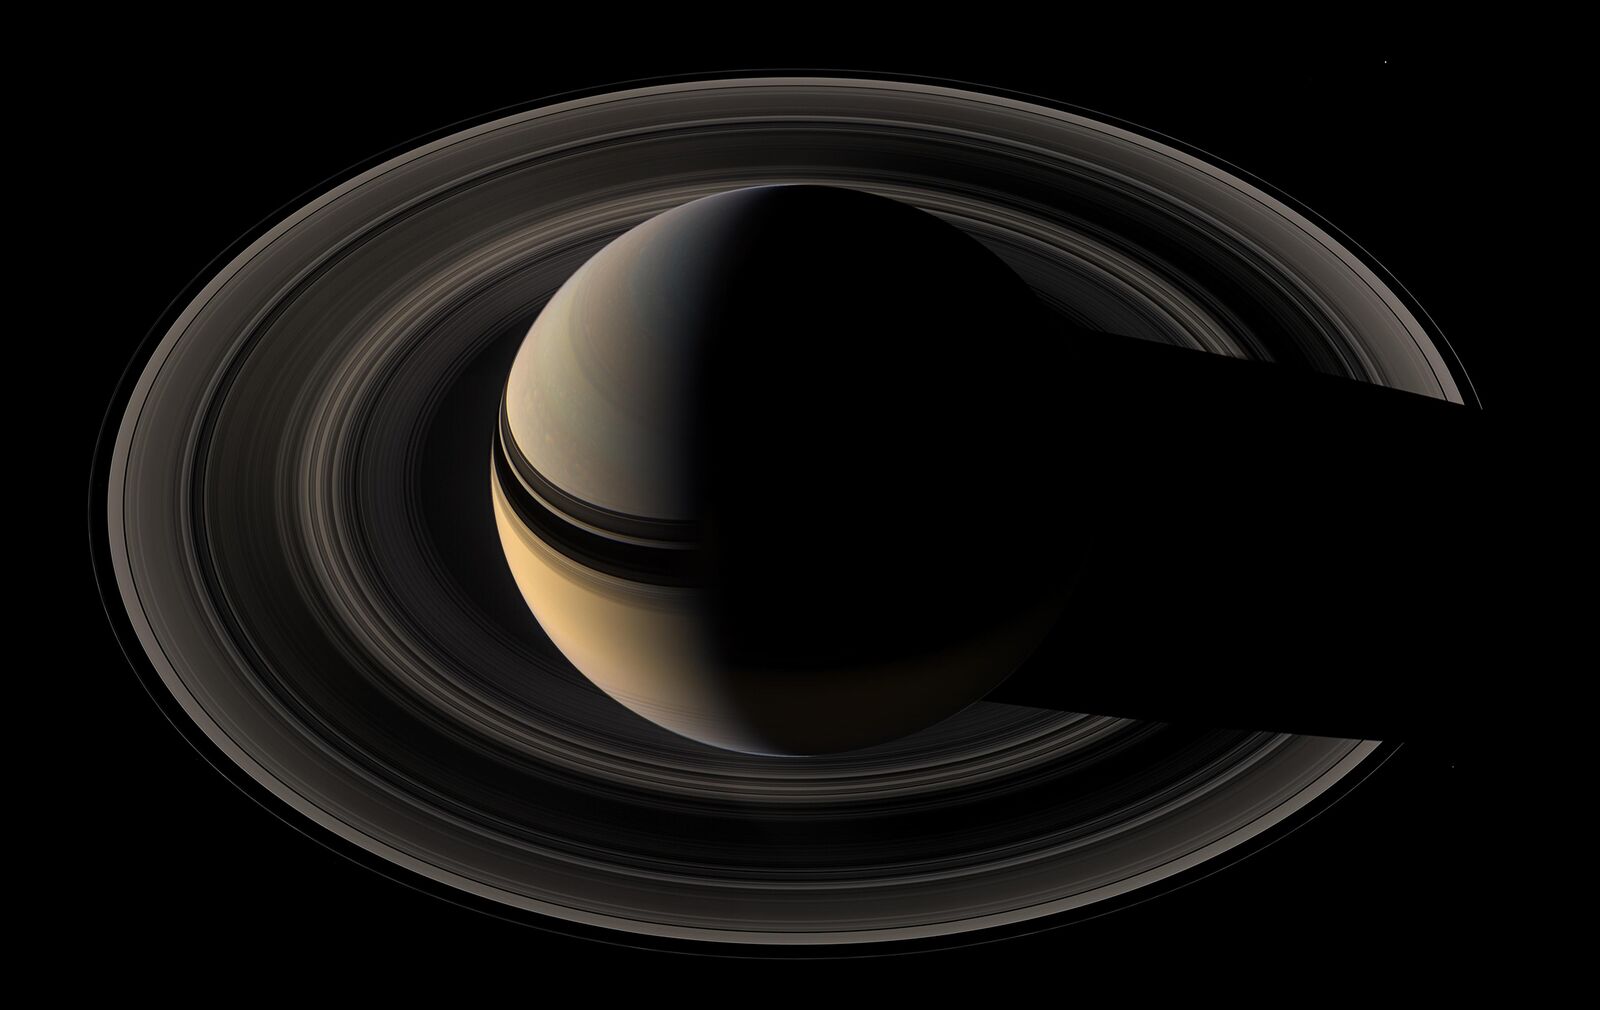 Saturn, May 2007. The planet is adorned by seven rings, which rotate at different speeds. They were born perhaps from the rubble of comets or disintegrated moons. Source: NASA/JPL/Space Science Institute